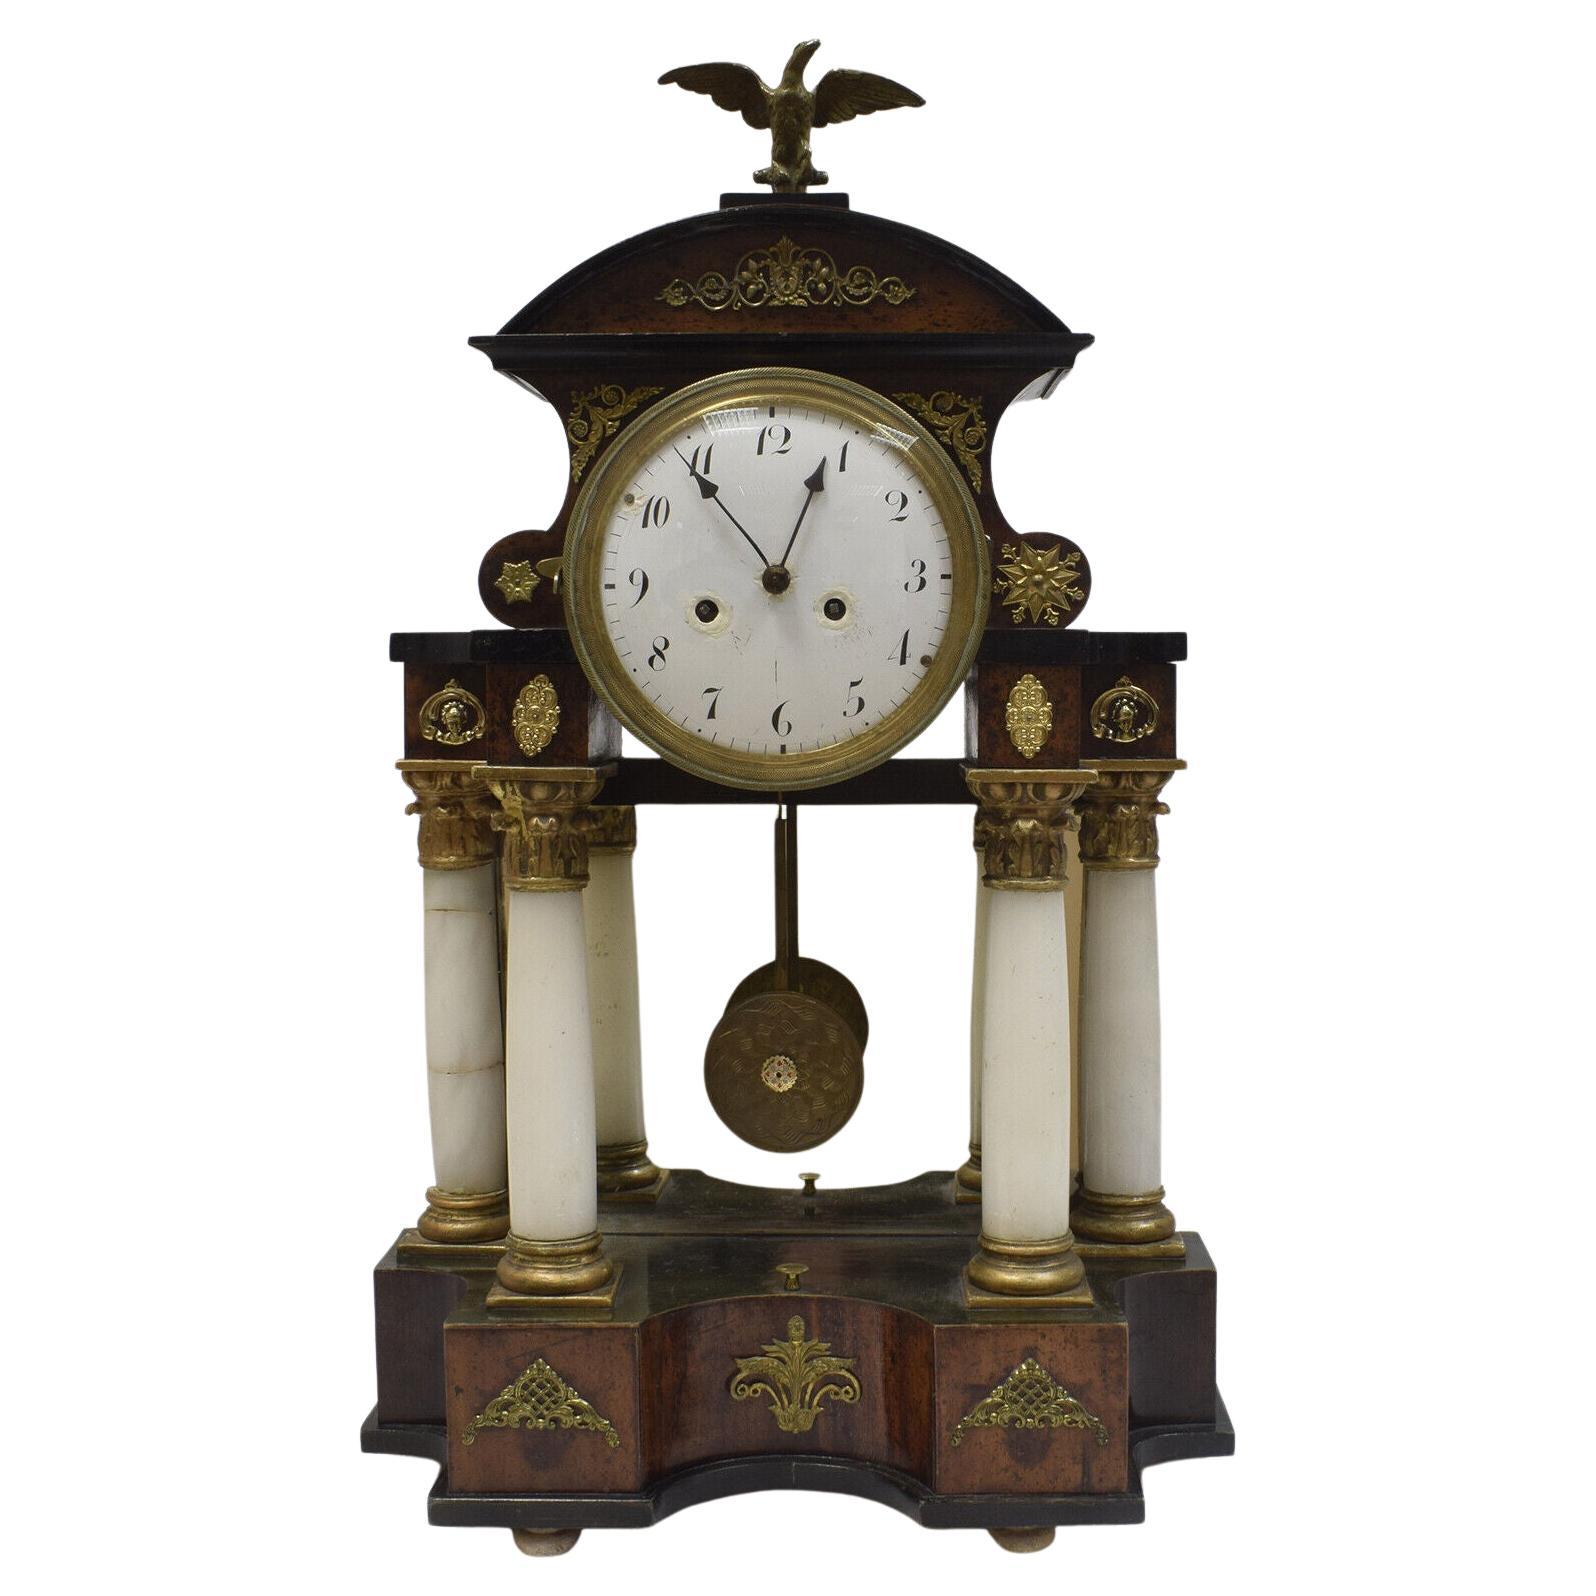 19th Century Functional Column Clock: Antique Mantel Clock with Portico, 1G05 For Sale